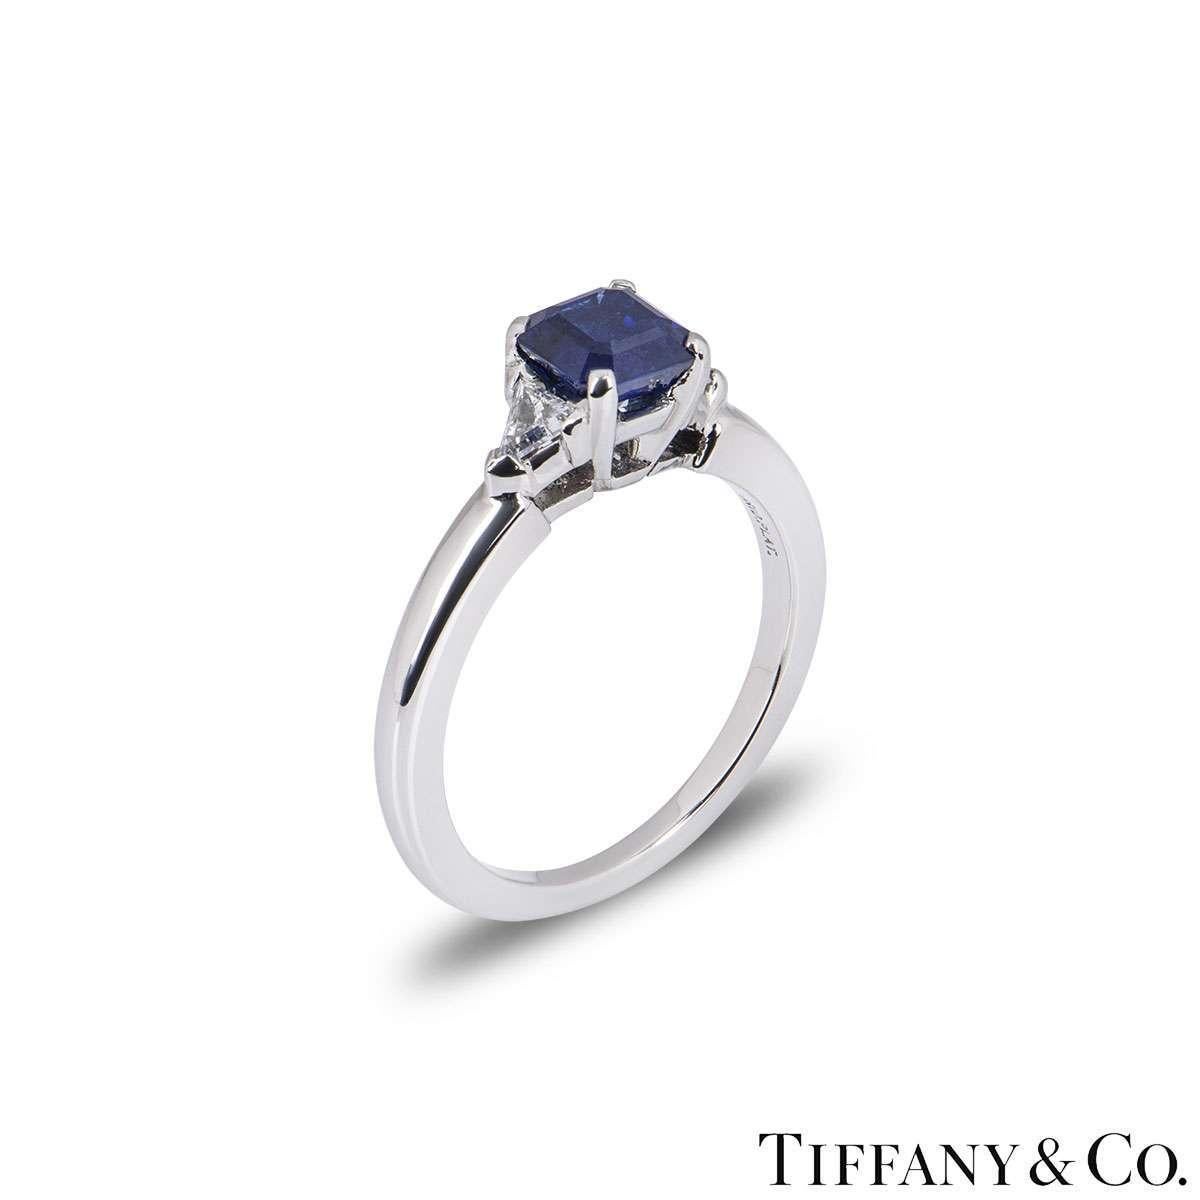 A platinum diamond and sapphire ring by Tiffany & Co. The ring is set to the centre with a step cut blue sapphire weighing approximately 0.50ct. The sapphire is complemented by two trilliant cut diamonds totalling approximately 0.30ct. The ring is